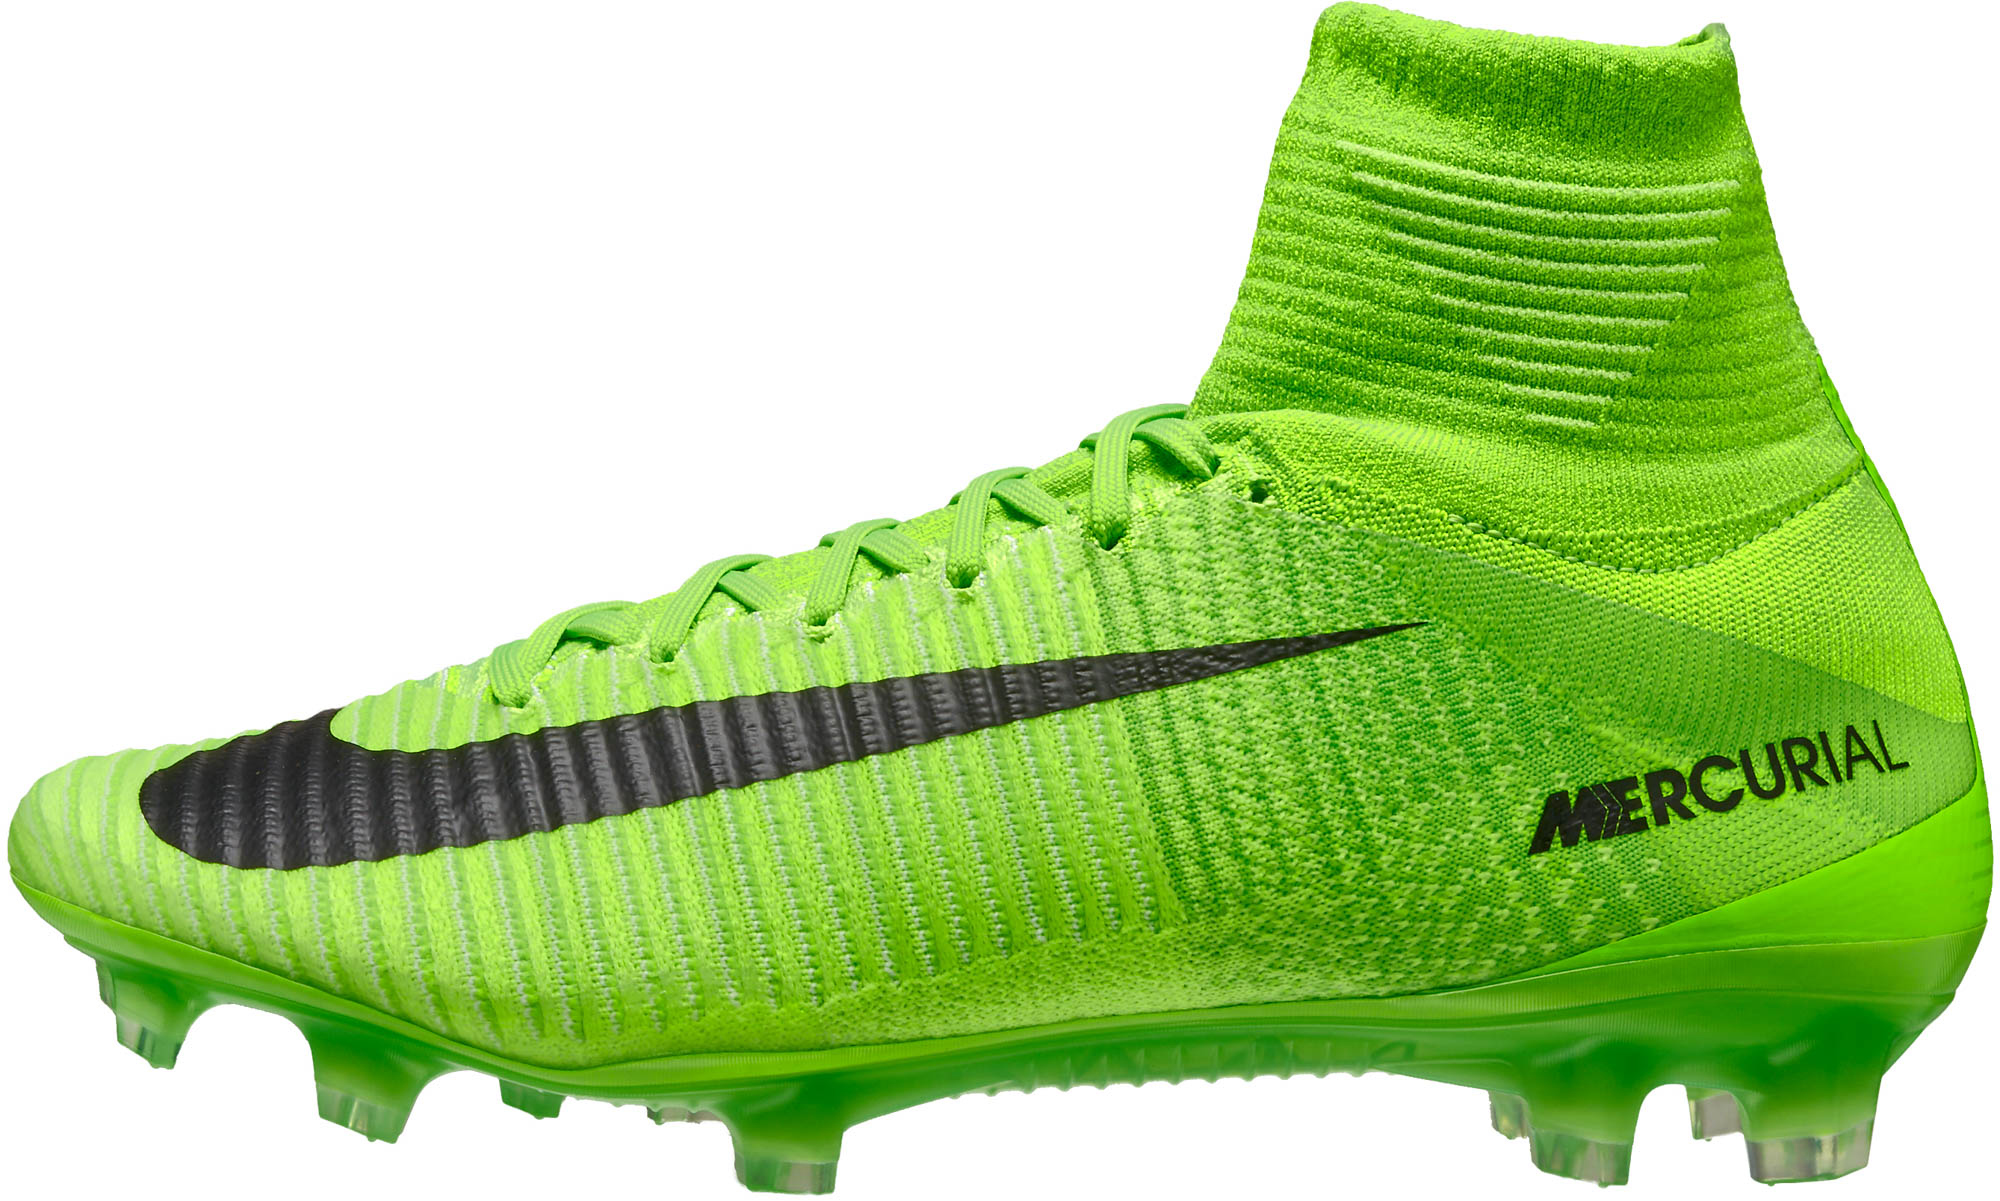 climb recovery Chip Nike Mercurial Superfly V FG - Green Superfly Cleats